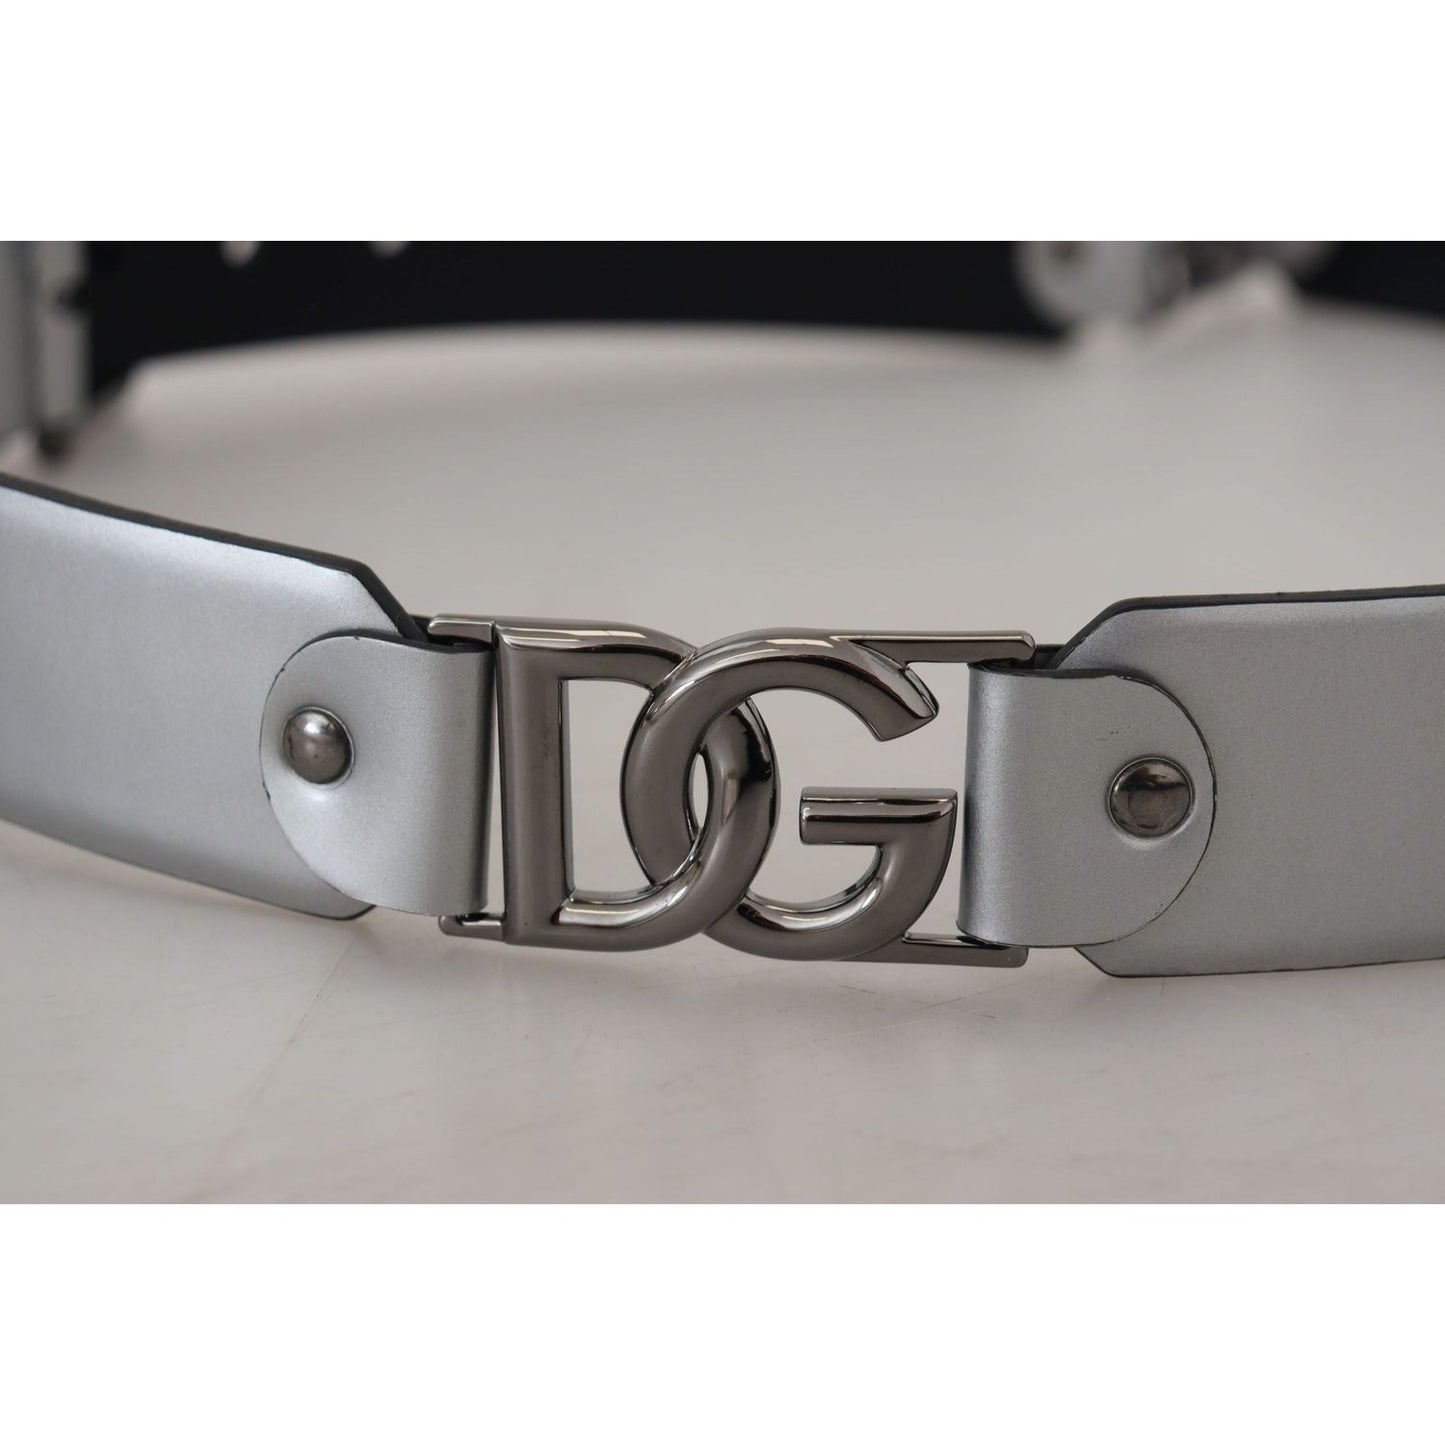 Dolce & Gabbana Chic Silver Leather Belt with Metal Buckle metallic-silver-leather-dg-logo-metal-buckle-belt